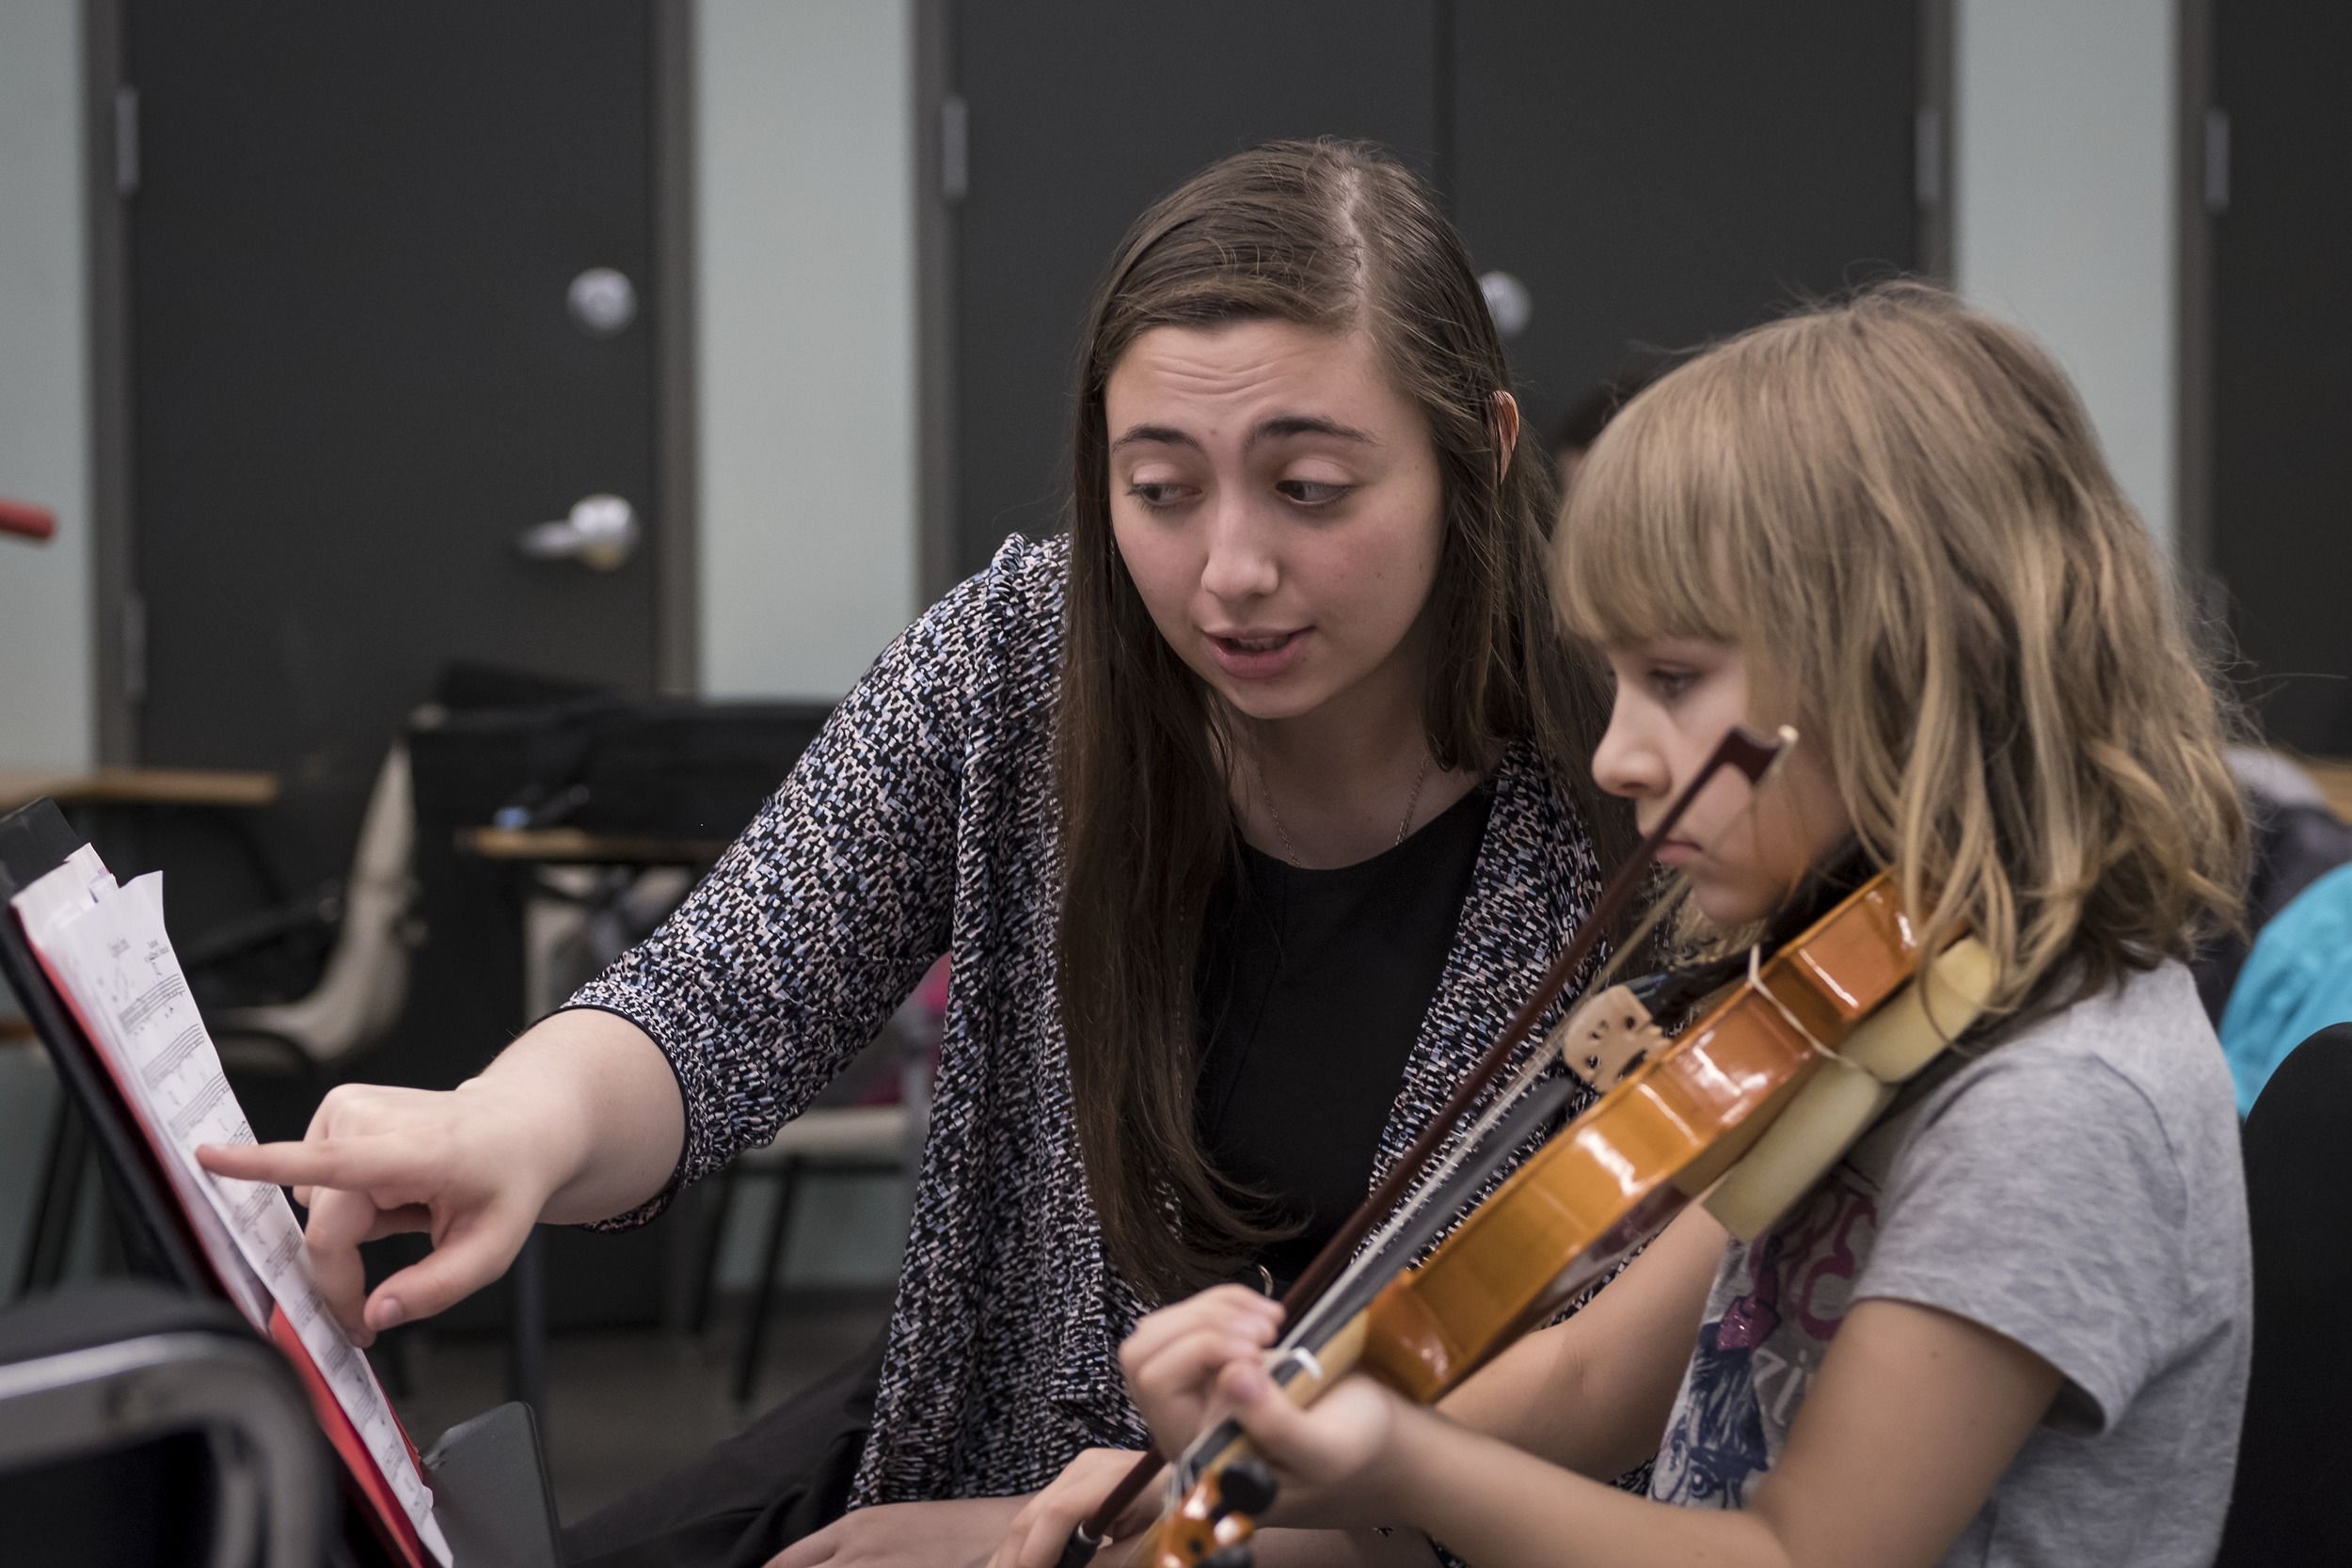 A Temple student teacher helps a pupil to read sheet music.